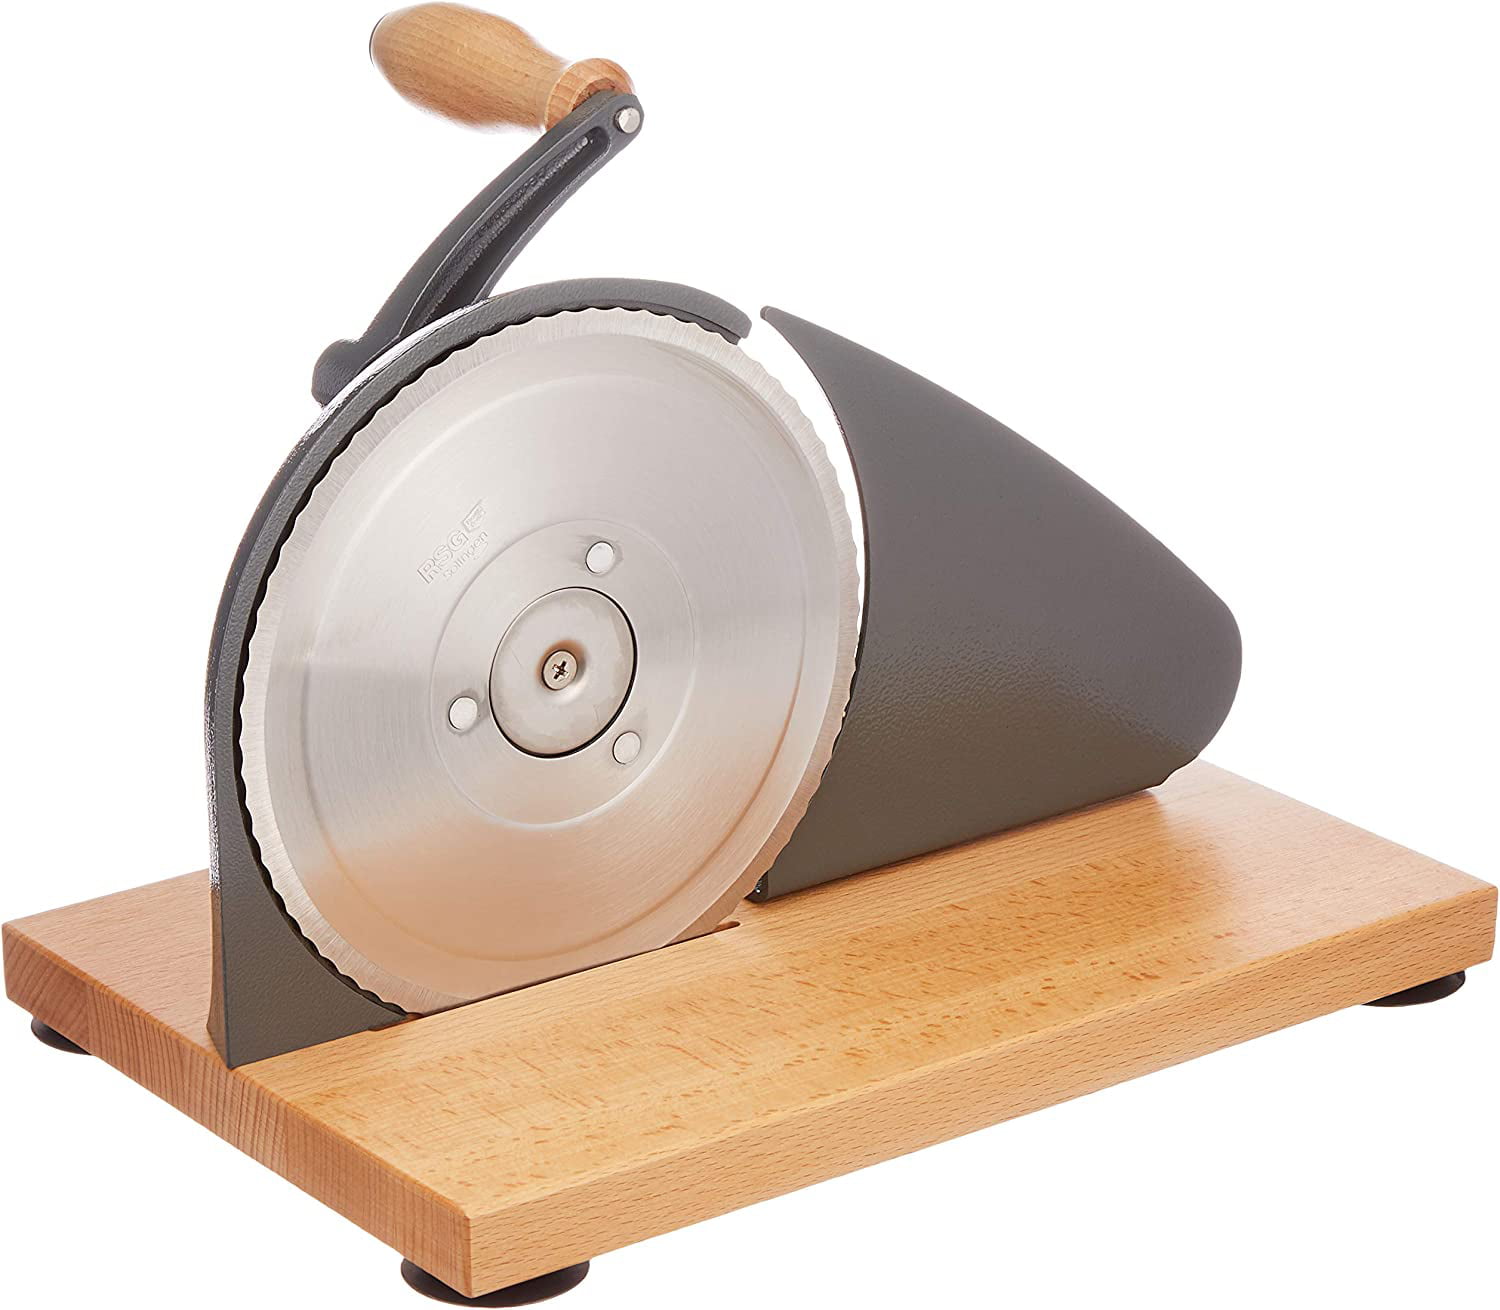 CraftKitchen Bread Slicer Knife 8 - SANE - Sewing and Housewares